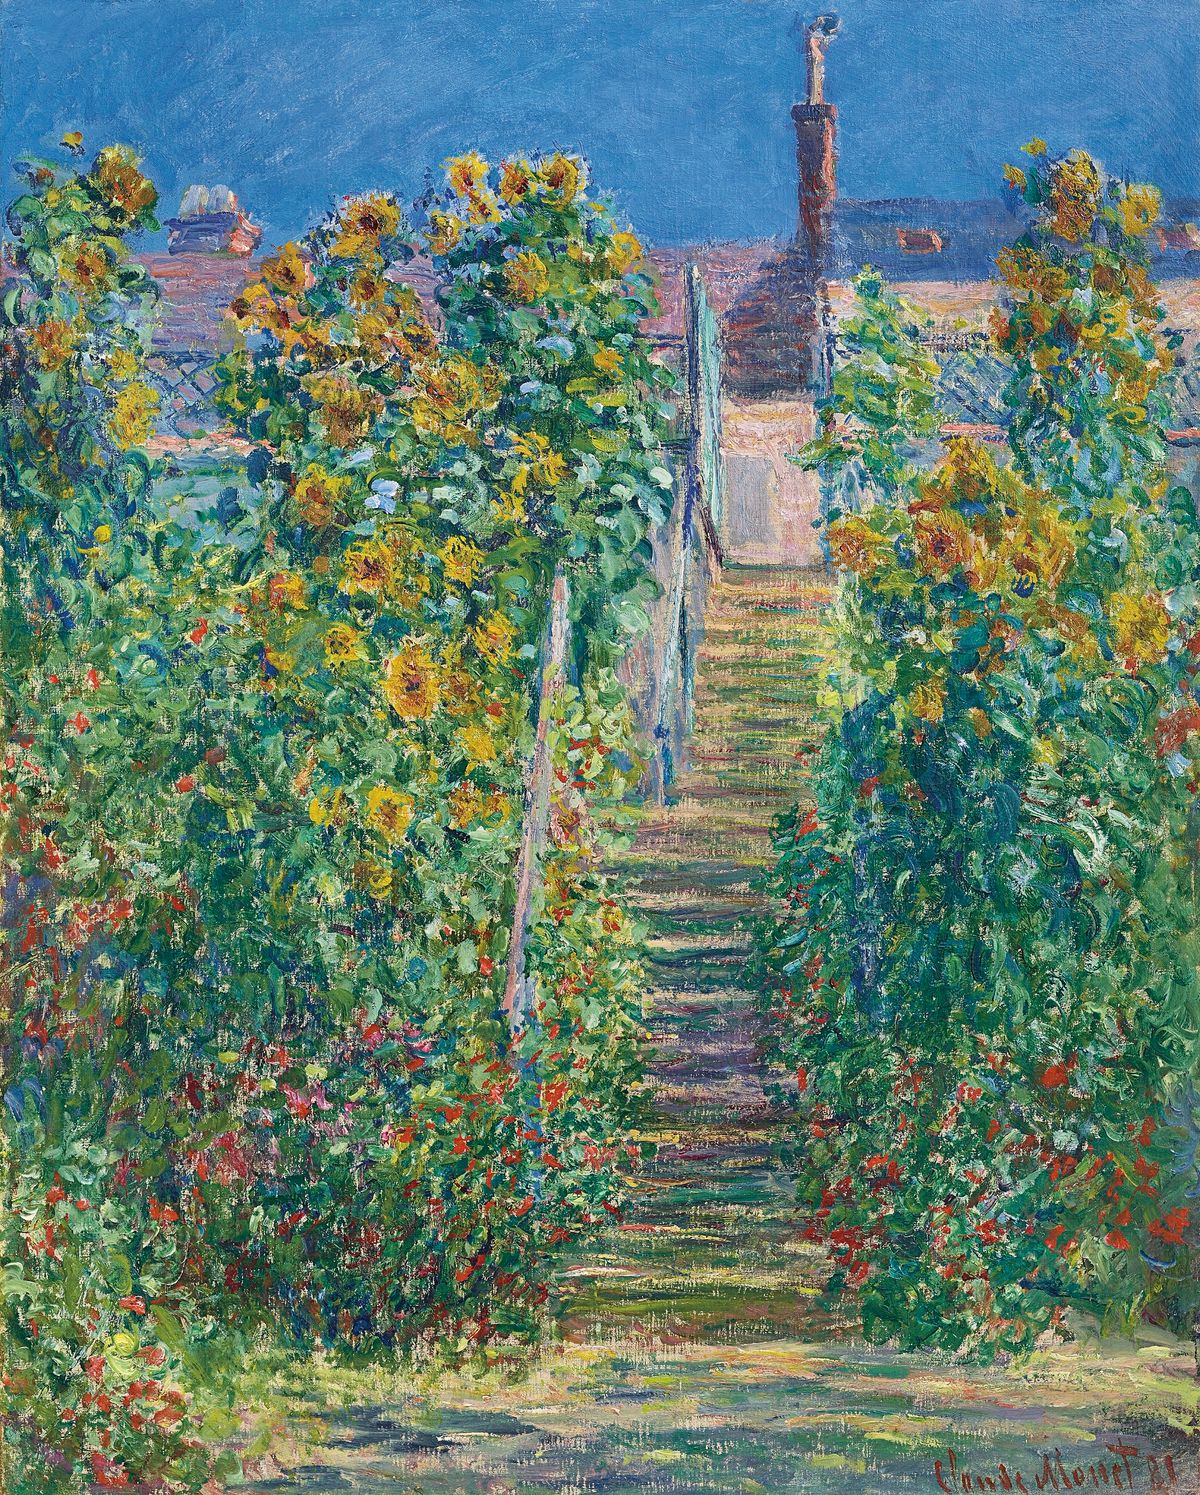 Claude Monet’s oil painting, L’escalier à Vétheuil (1881), is the top lot of the Impressionist and Modern evening sale in New York on 11 November. Courtesy of Christie's